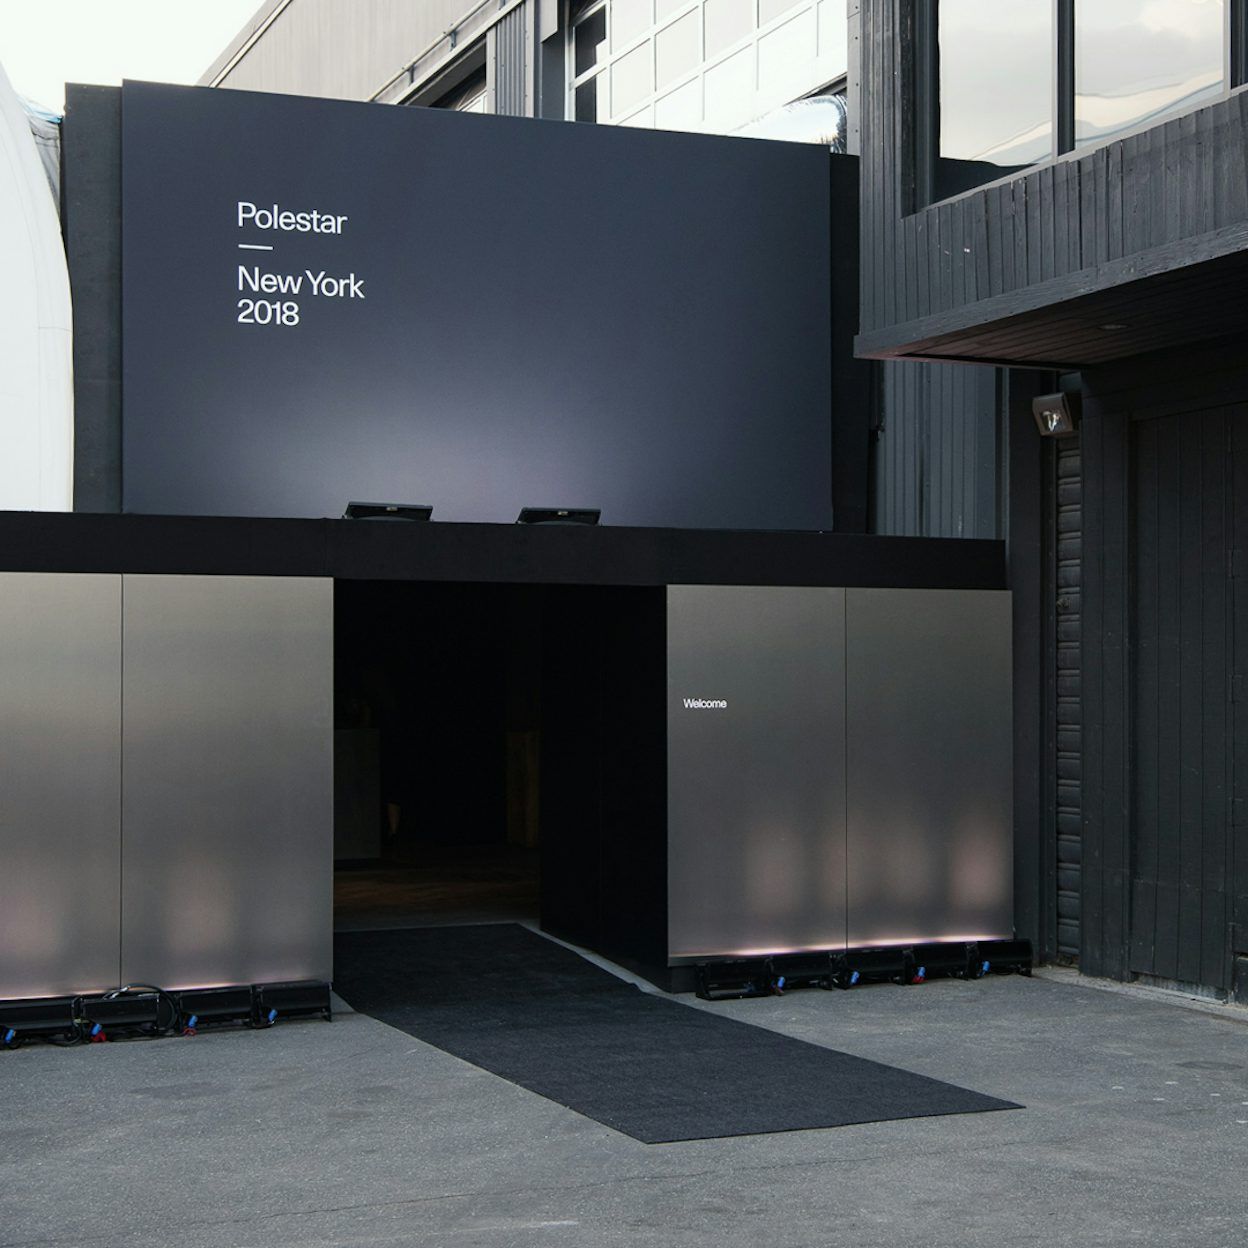 The entrance to a building with a sign that reads Polestar New York 2018.